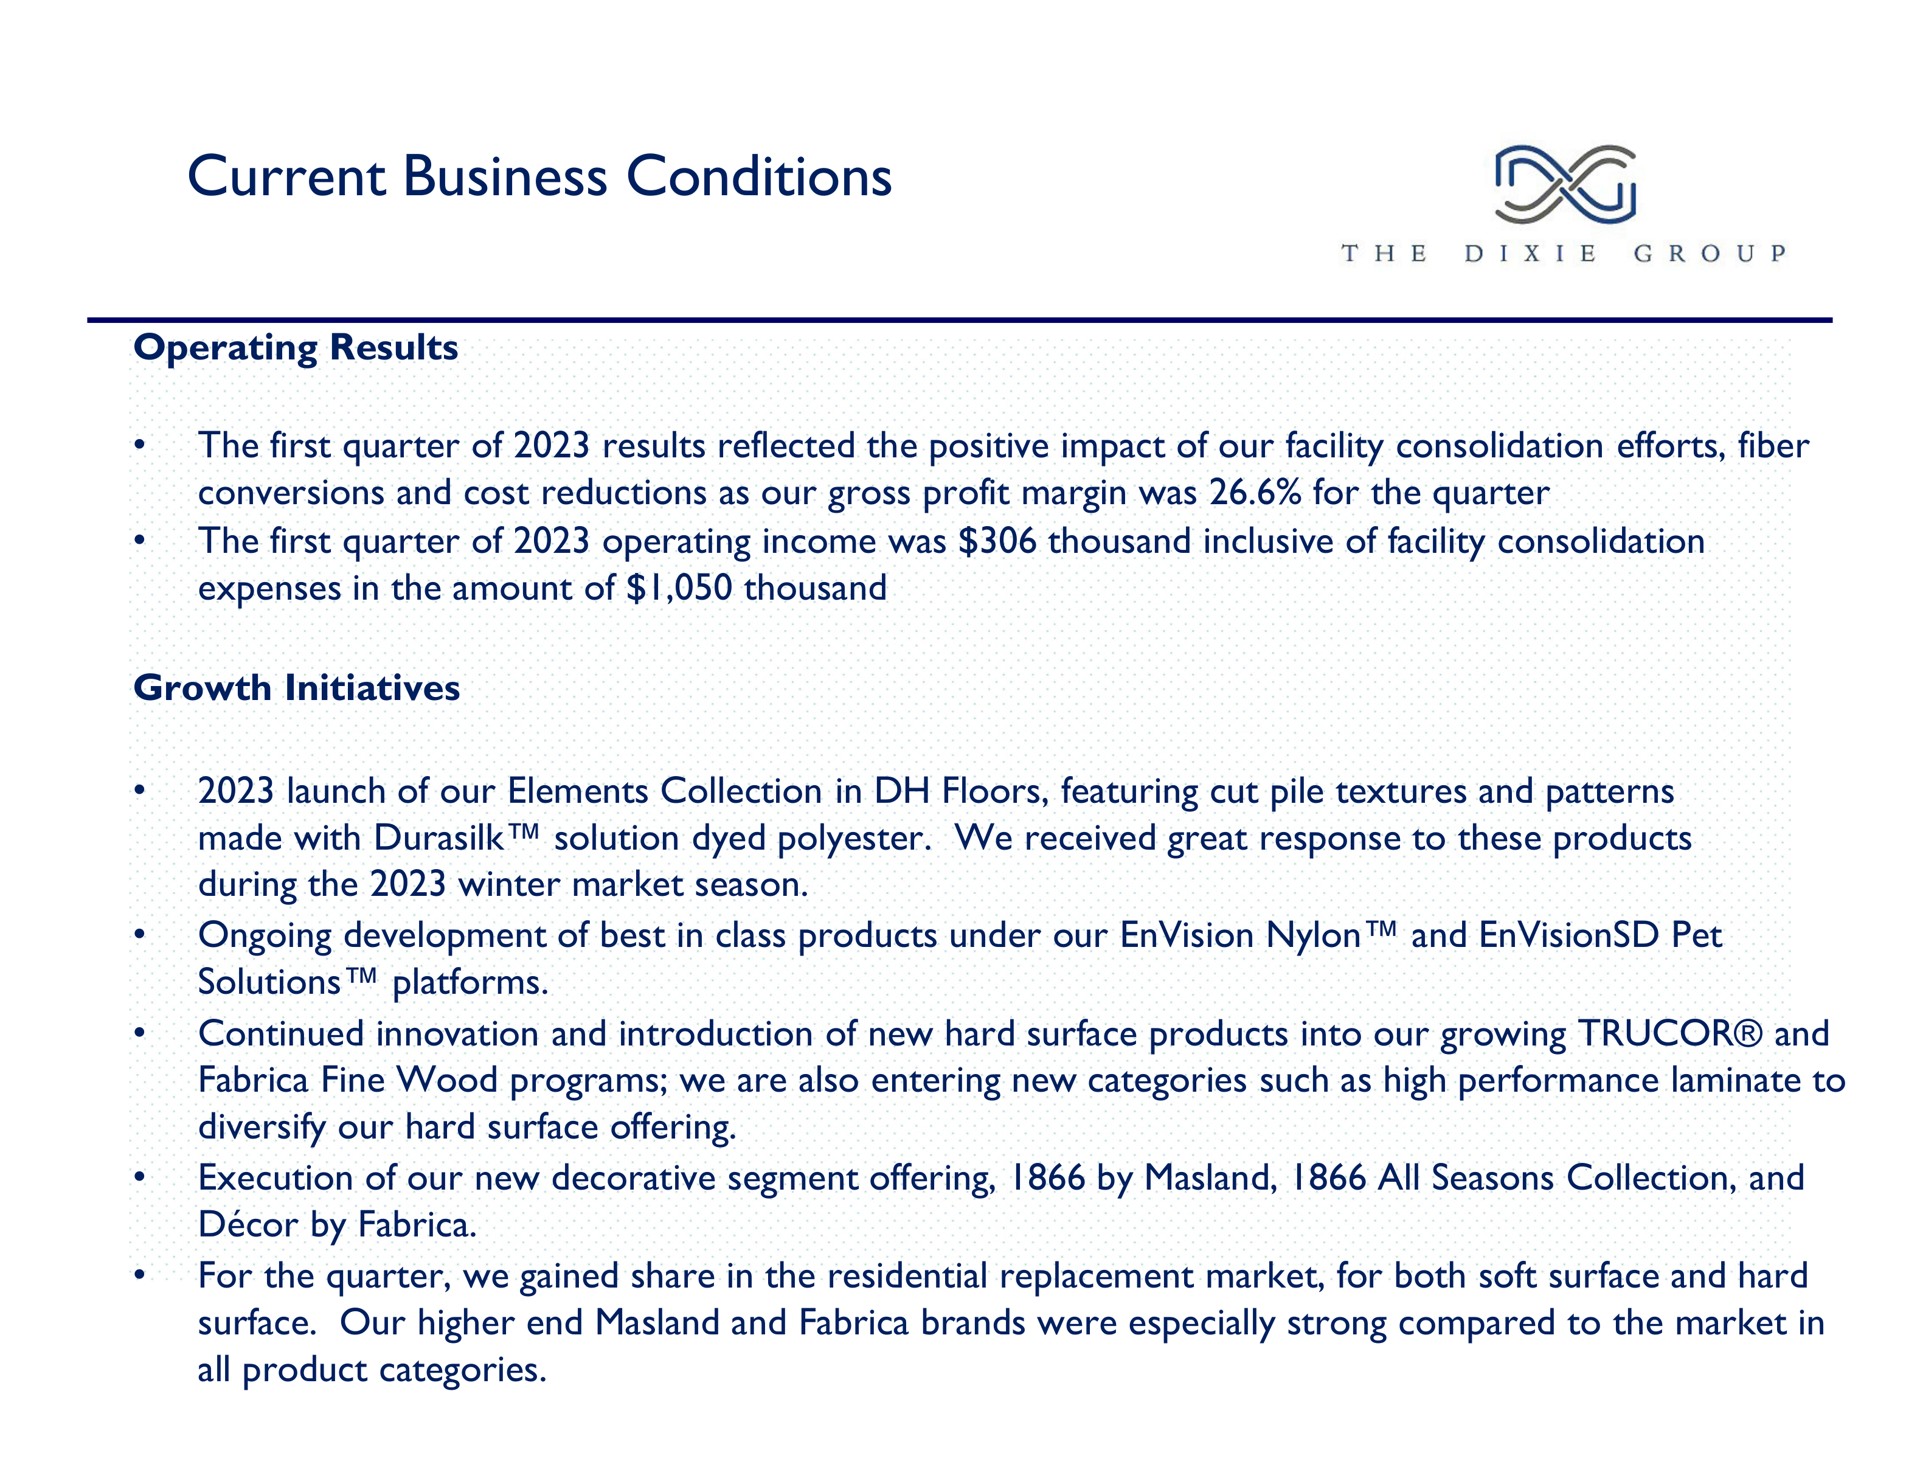 current business conditions | The Dixie Group